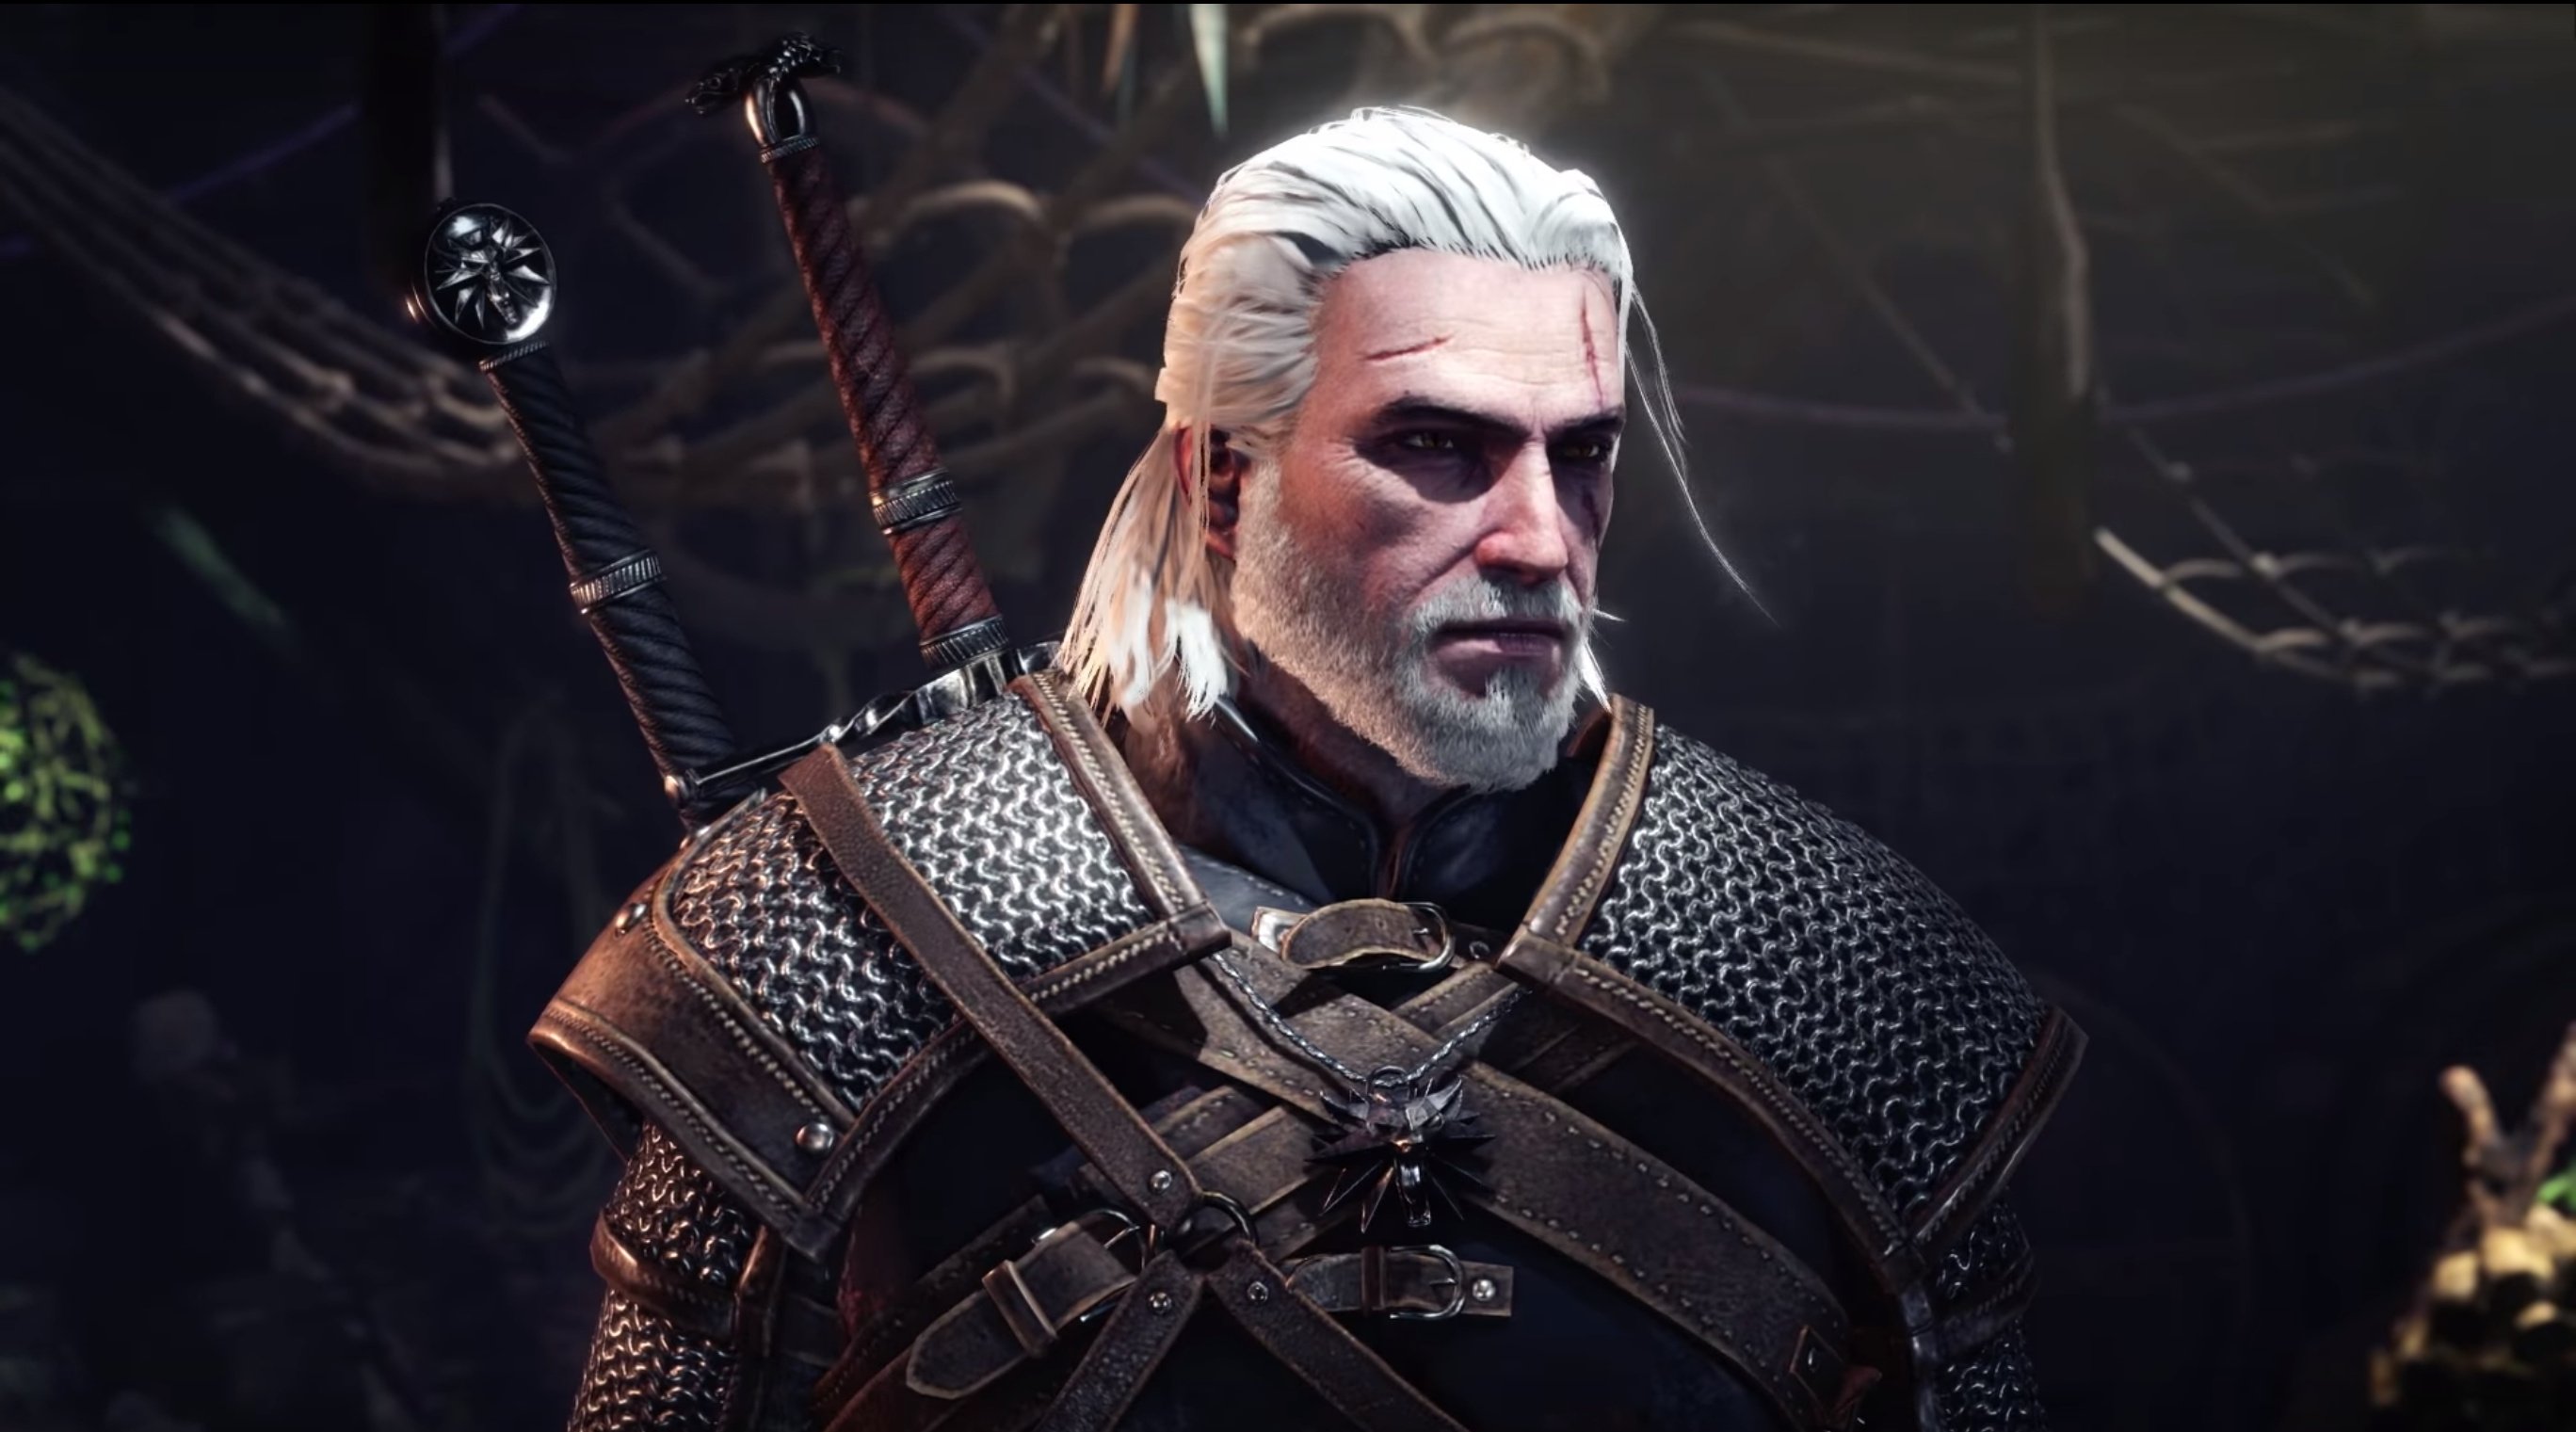 The Witcher 3 Crossover Drops February